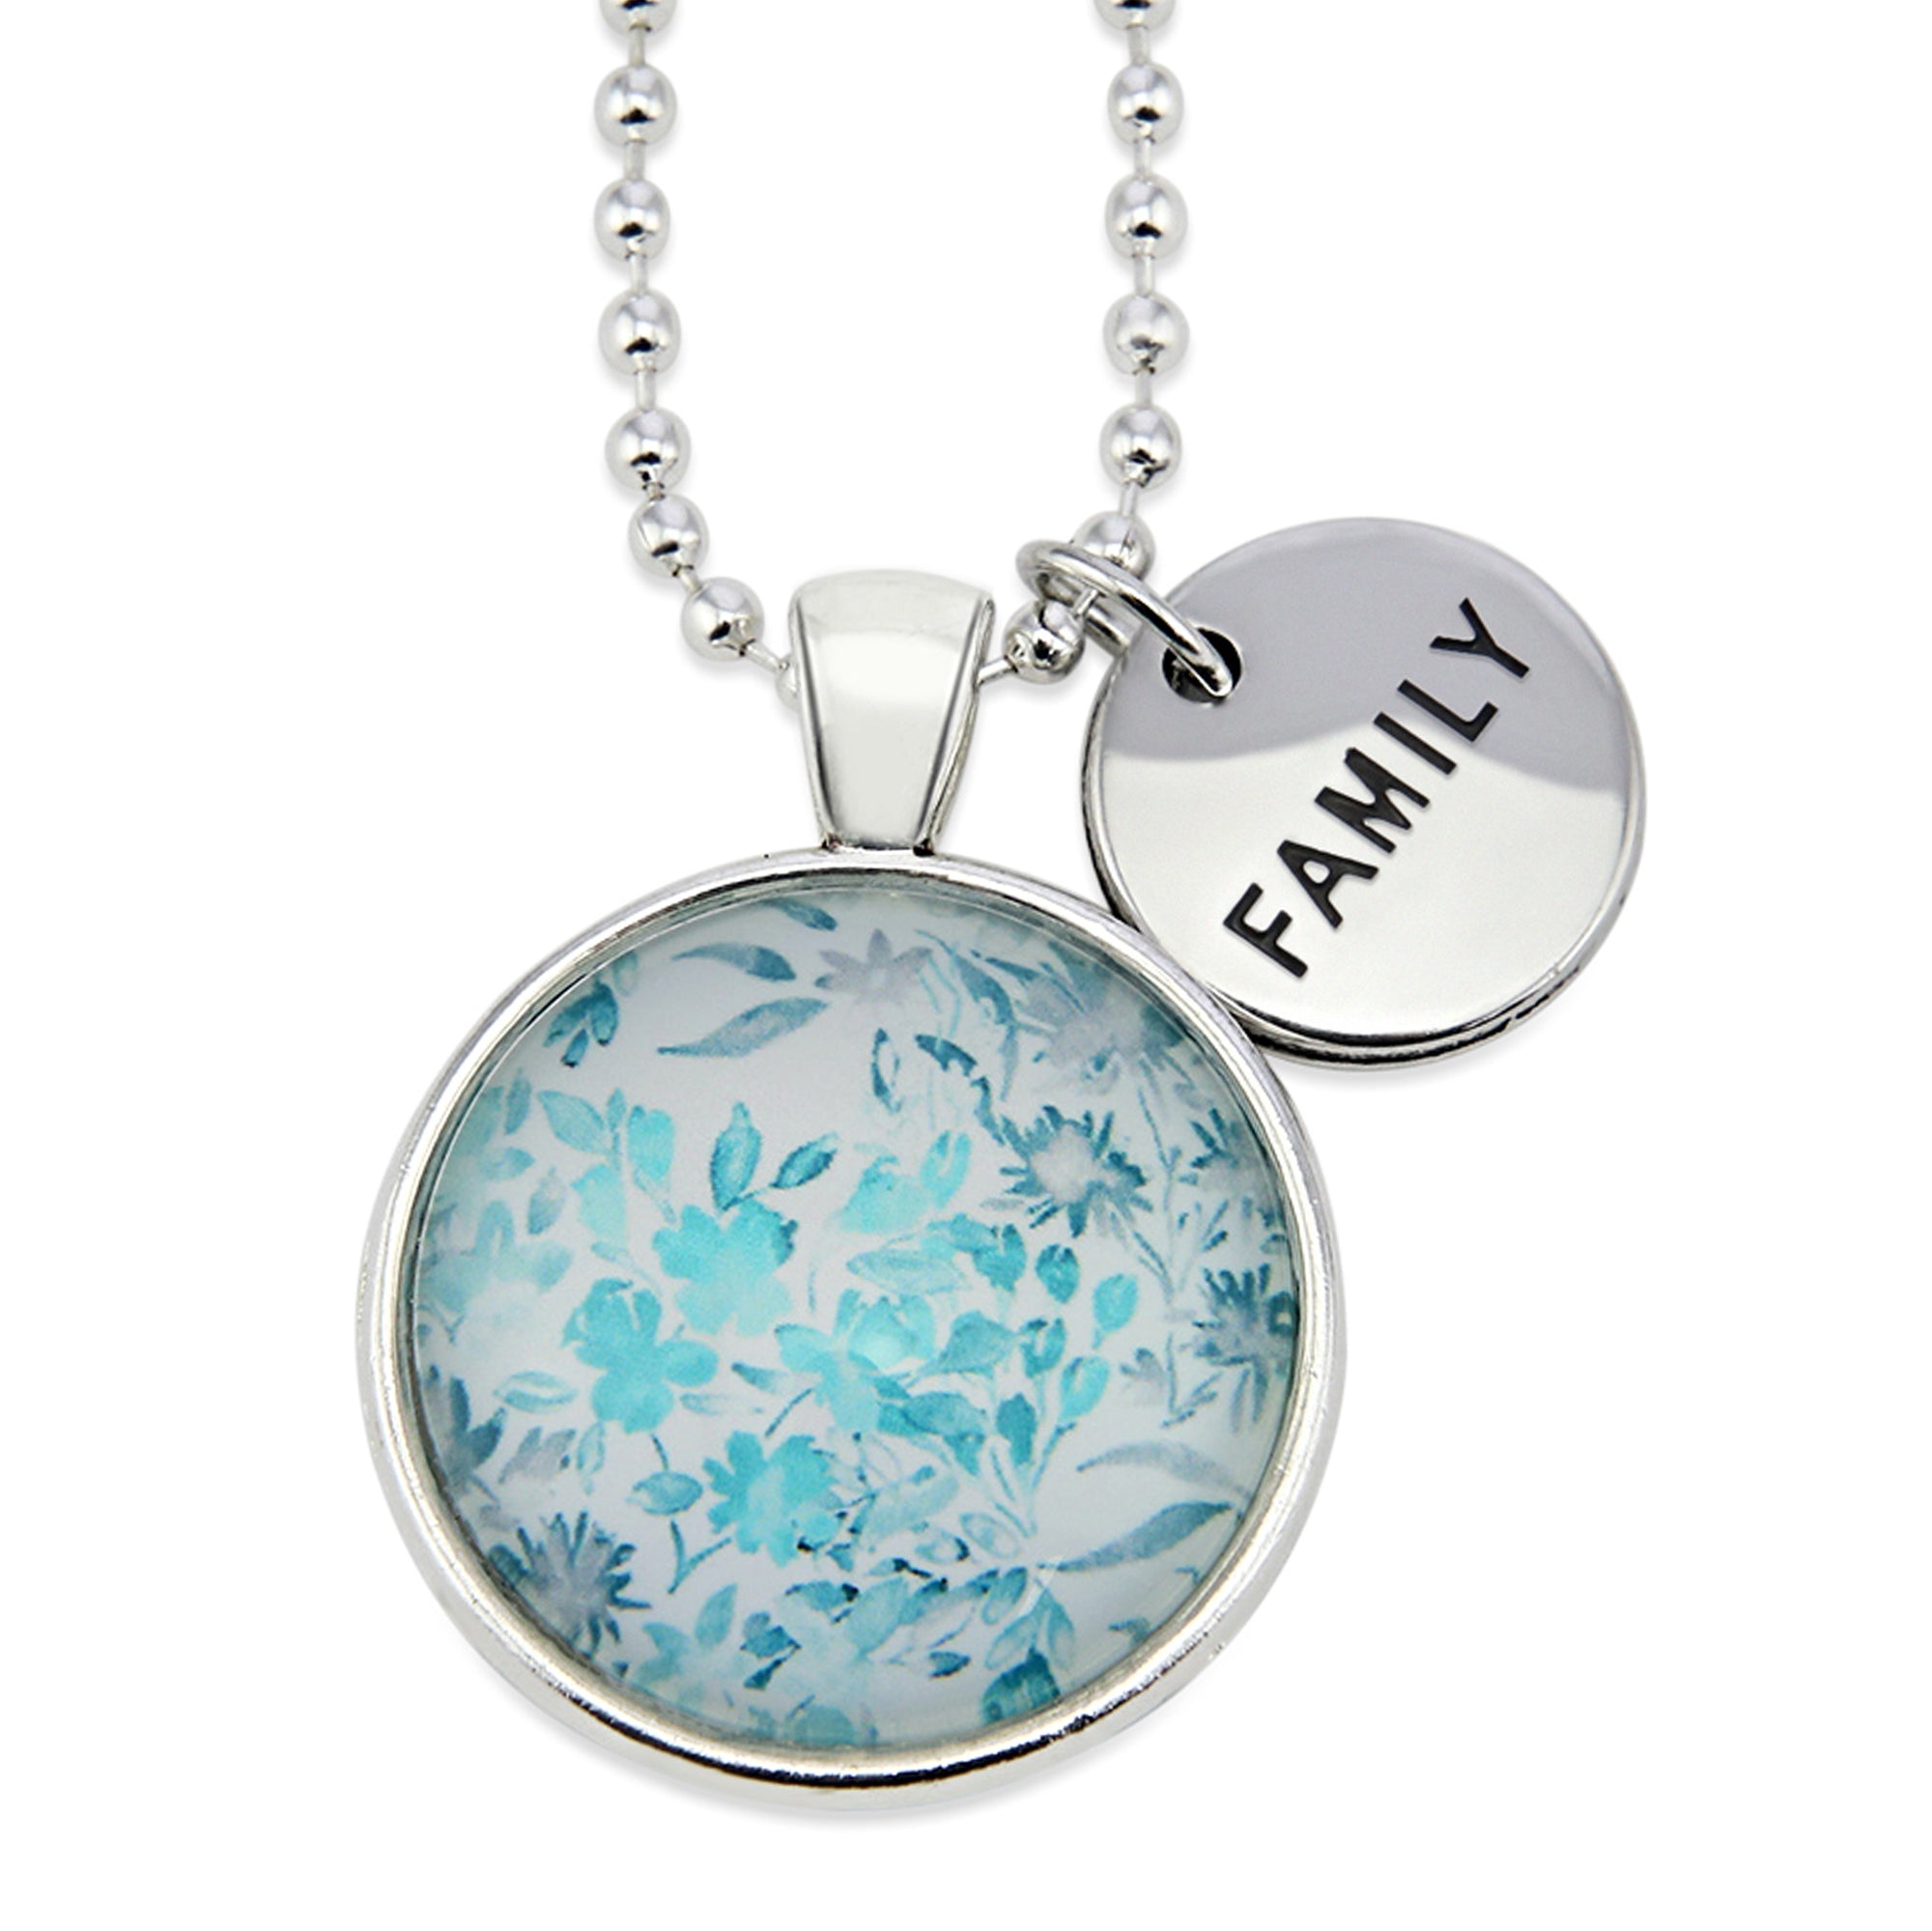 TEAL COLLECTION - Bright Silver 'FAMILY' Necklace - Arctic Blossom (13